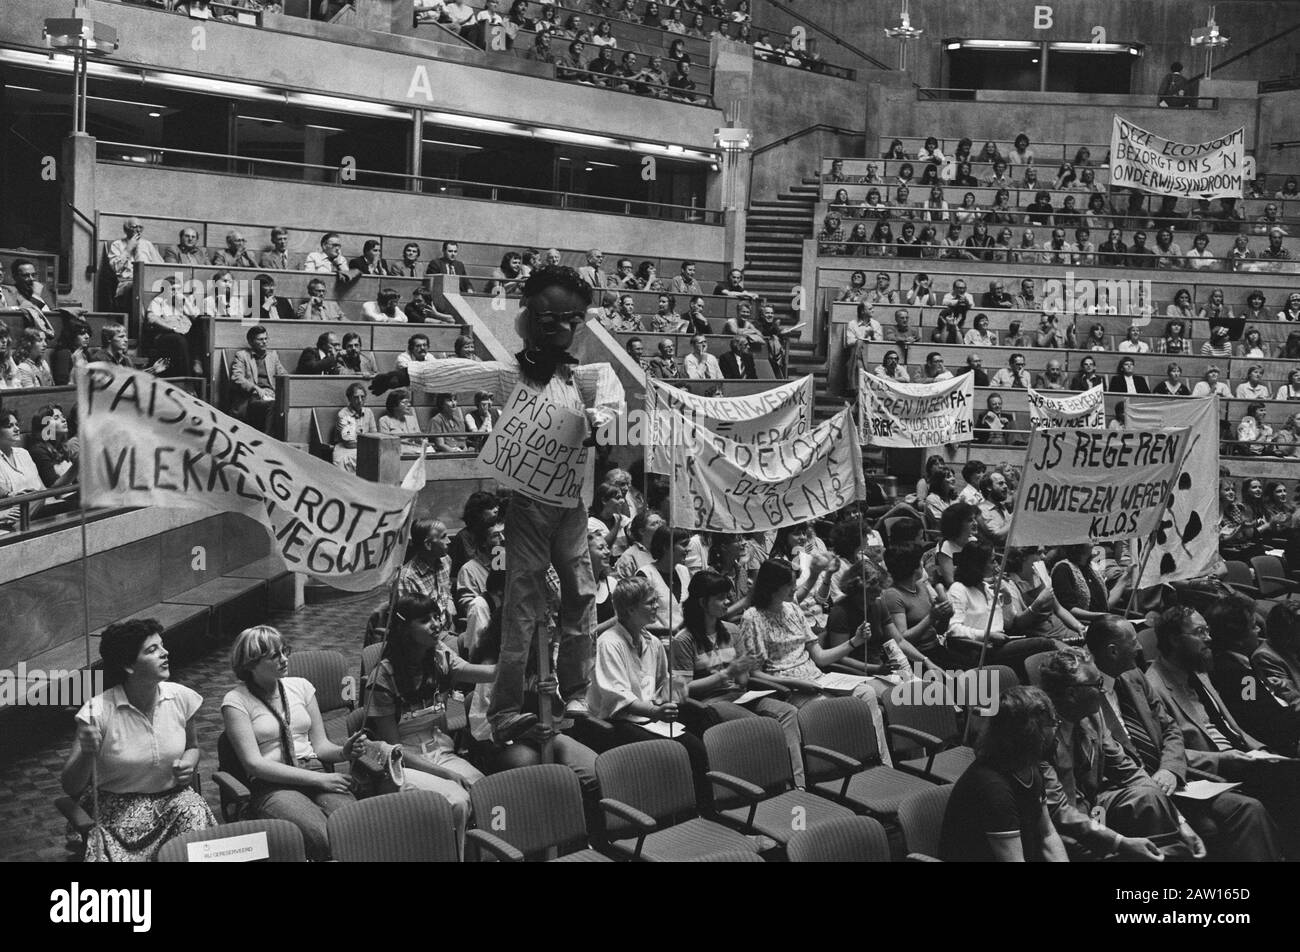 Demonstrative meeting of teachers and students of teacher training colleges and training schools for Kindergarten teachers against the minister's policy Pais (R & W) in the Music Center in Utrecht  The banners include Pais a dash run by, Spread causes suffering and Pais major leak roadmender Date: september 7, 1979 Location: Utrecht (prov), Utrecht (city) Keywords: demonstrations, teachers, banners, students Stock Photo